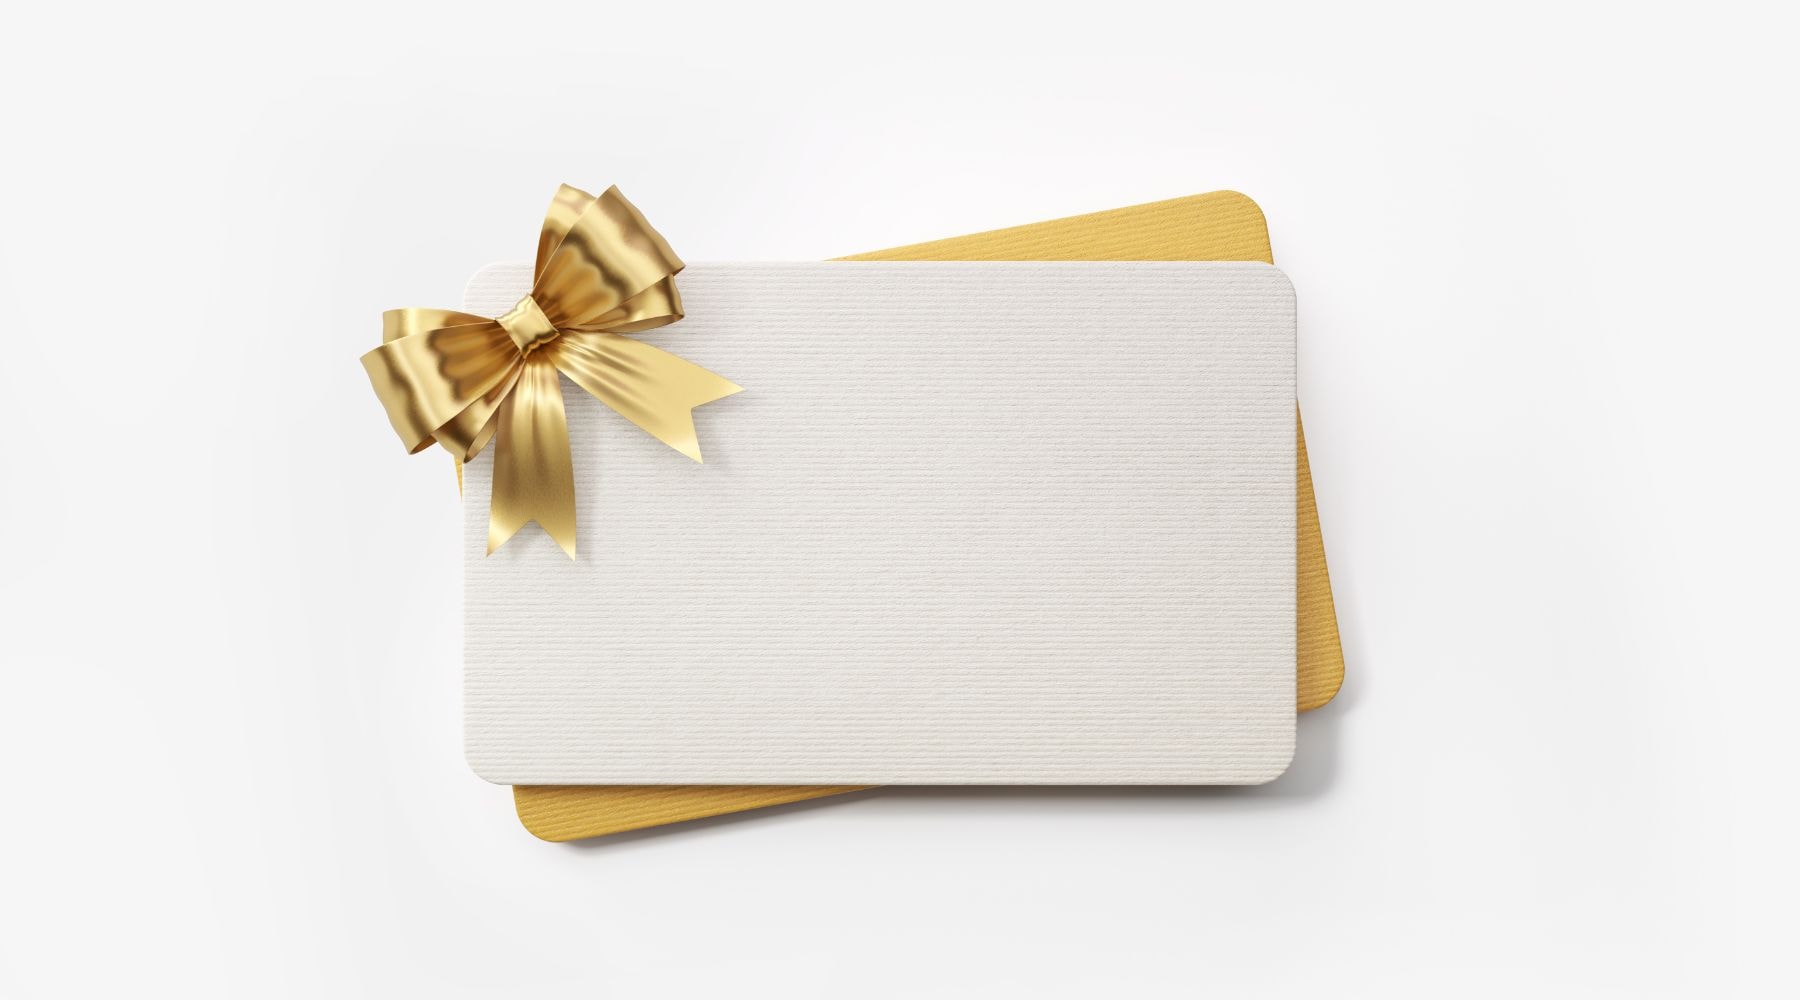 White gift card adorned with a golden bow on a plain background.